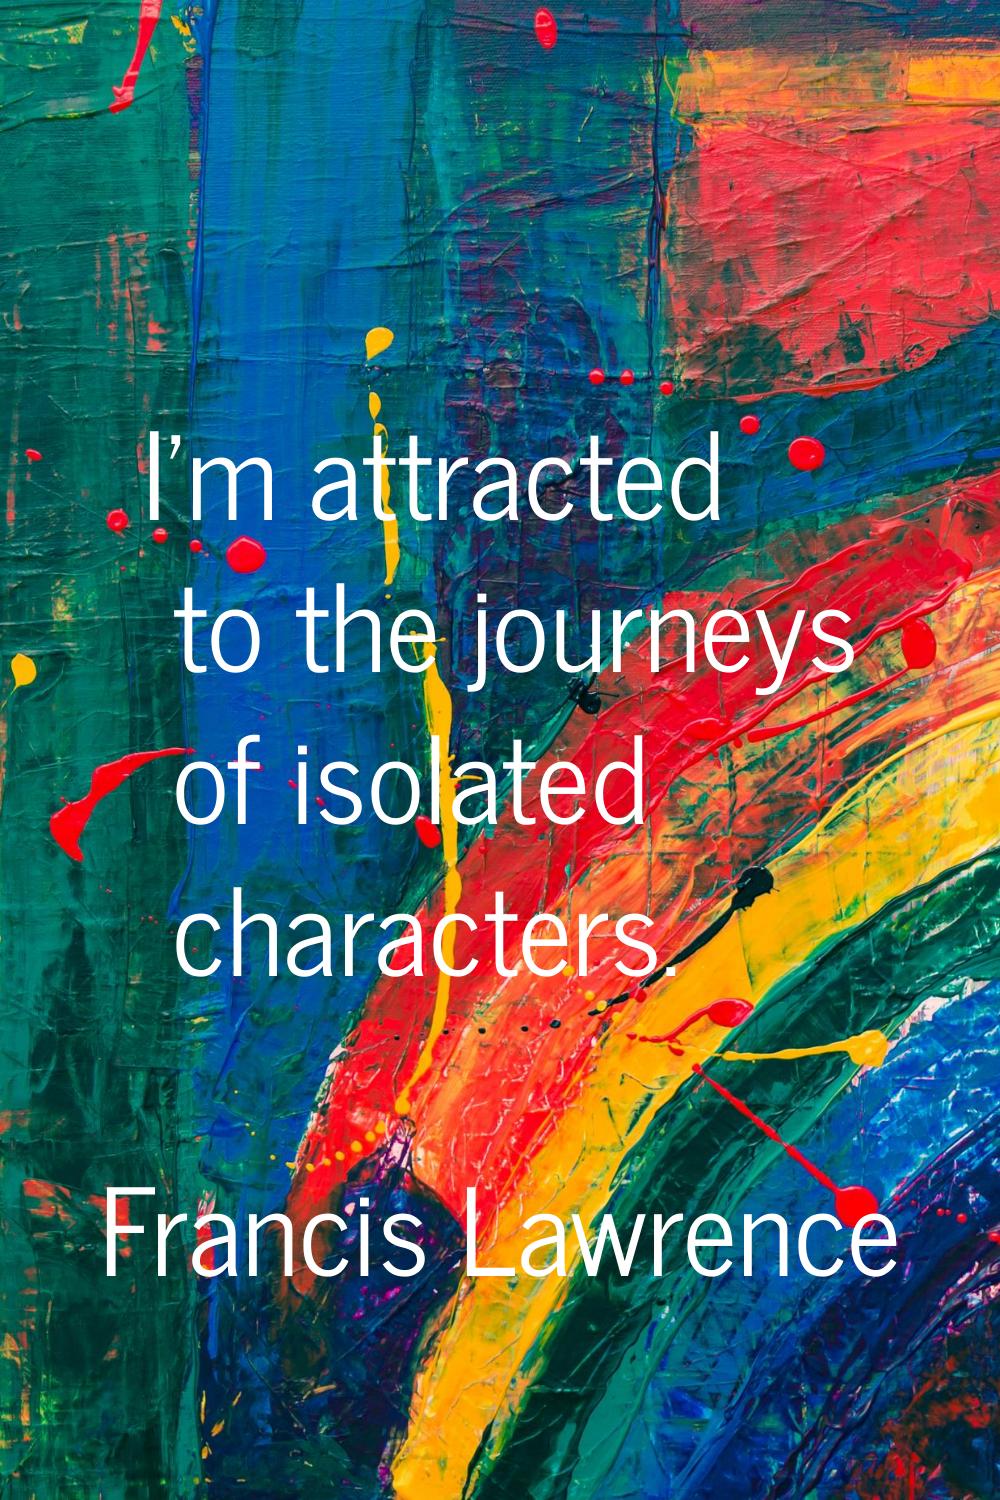 I'm attracted to the journeys of isolated characters.